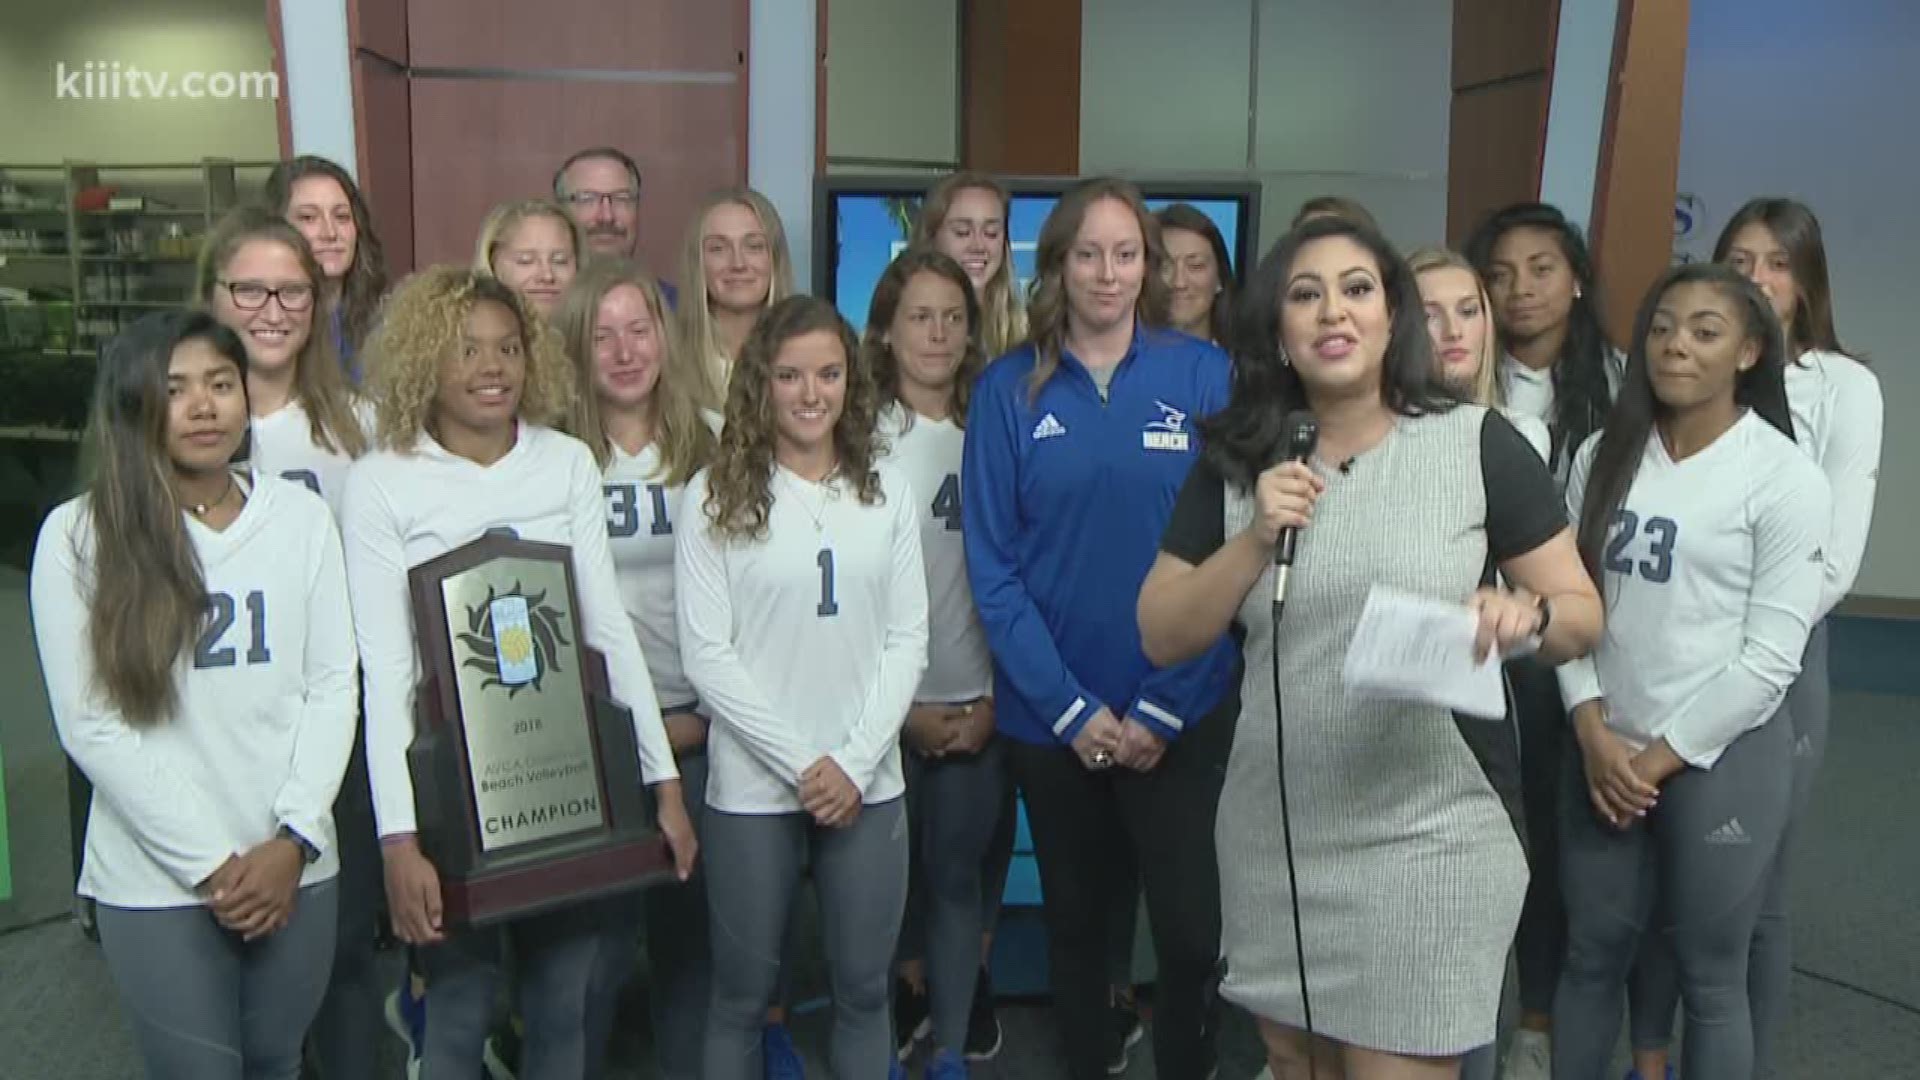 The Texas A&M University Kingsville's Women's Volleyball team visited First Edition to invite the viewers to support them in their upcoming season.